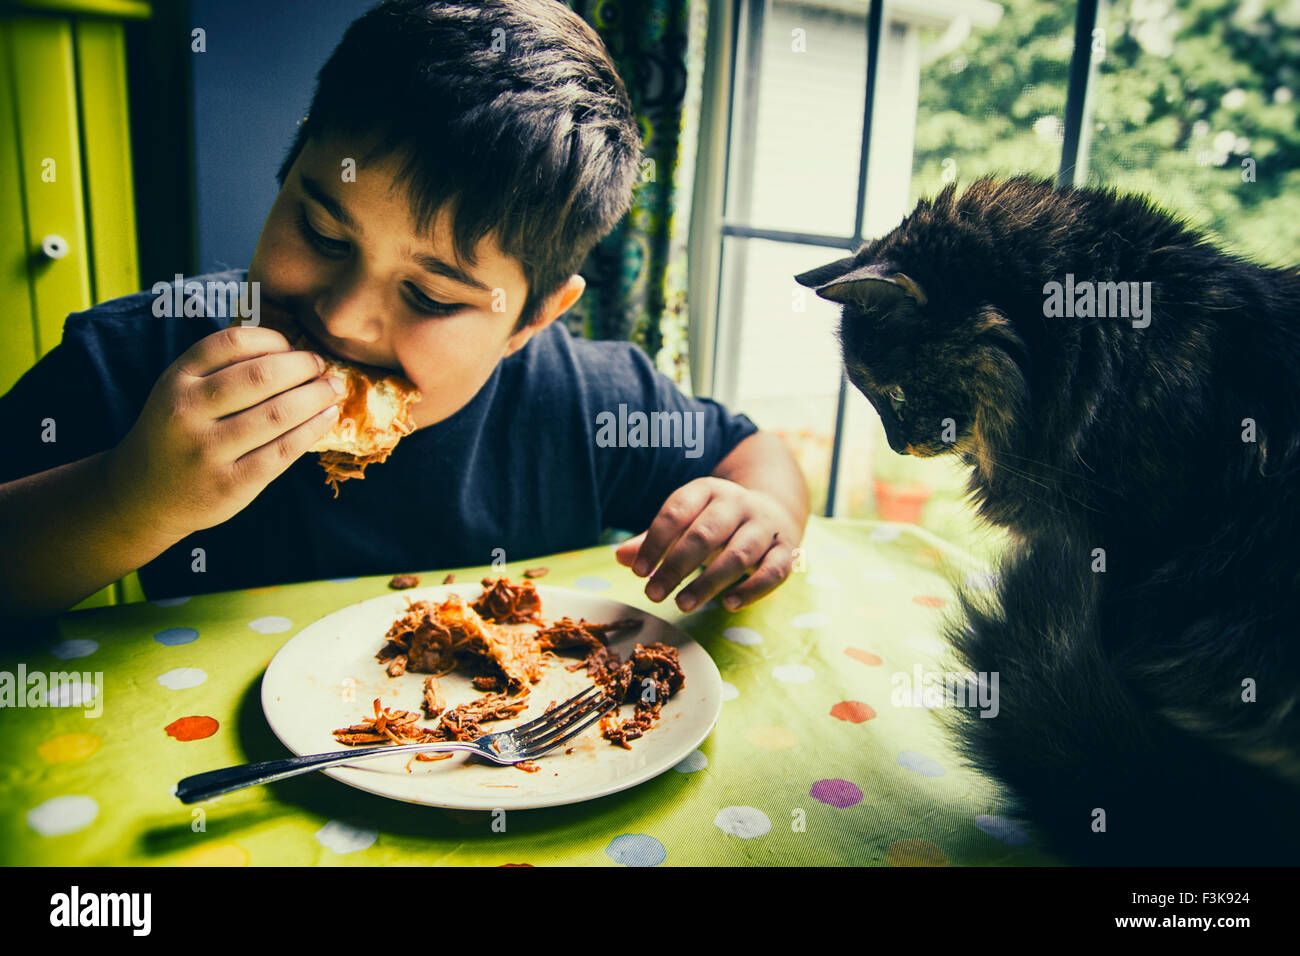 A young boy eats a BBQ sandwich as a long haired cat watches. Stock Photo